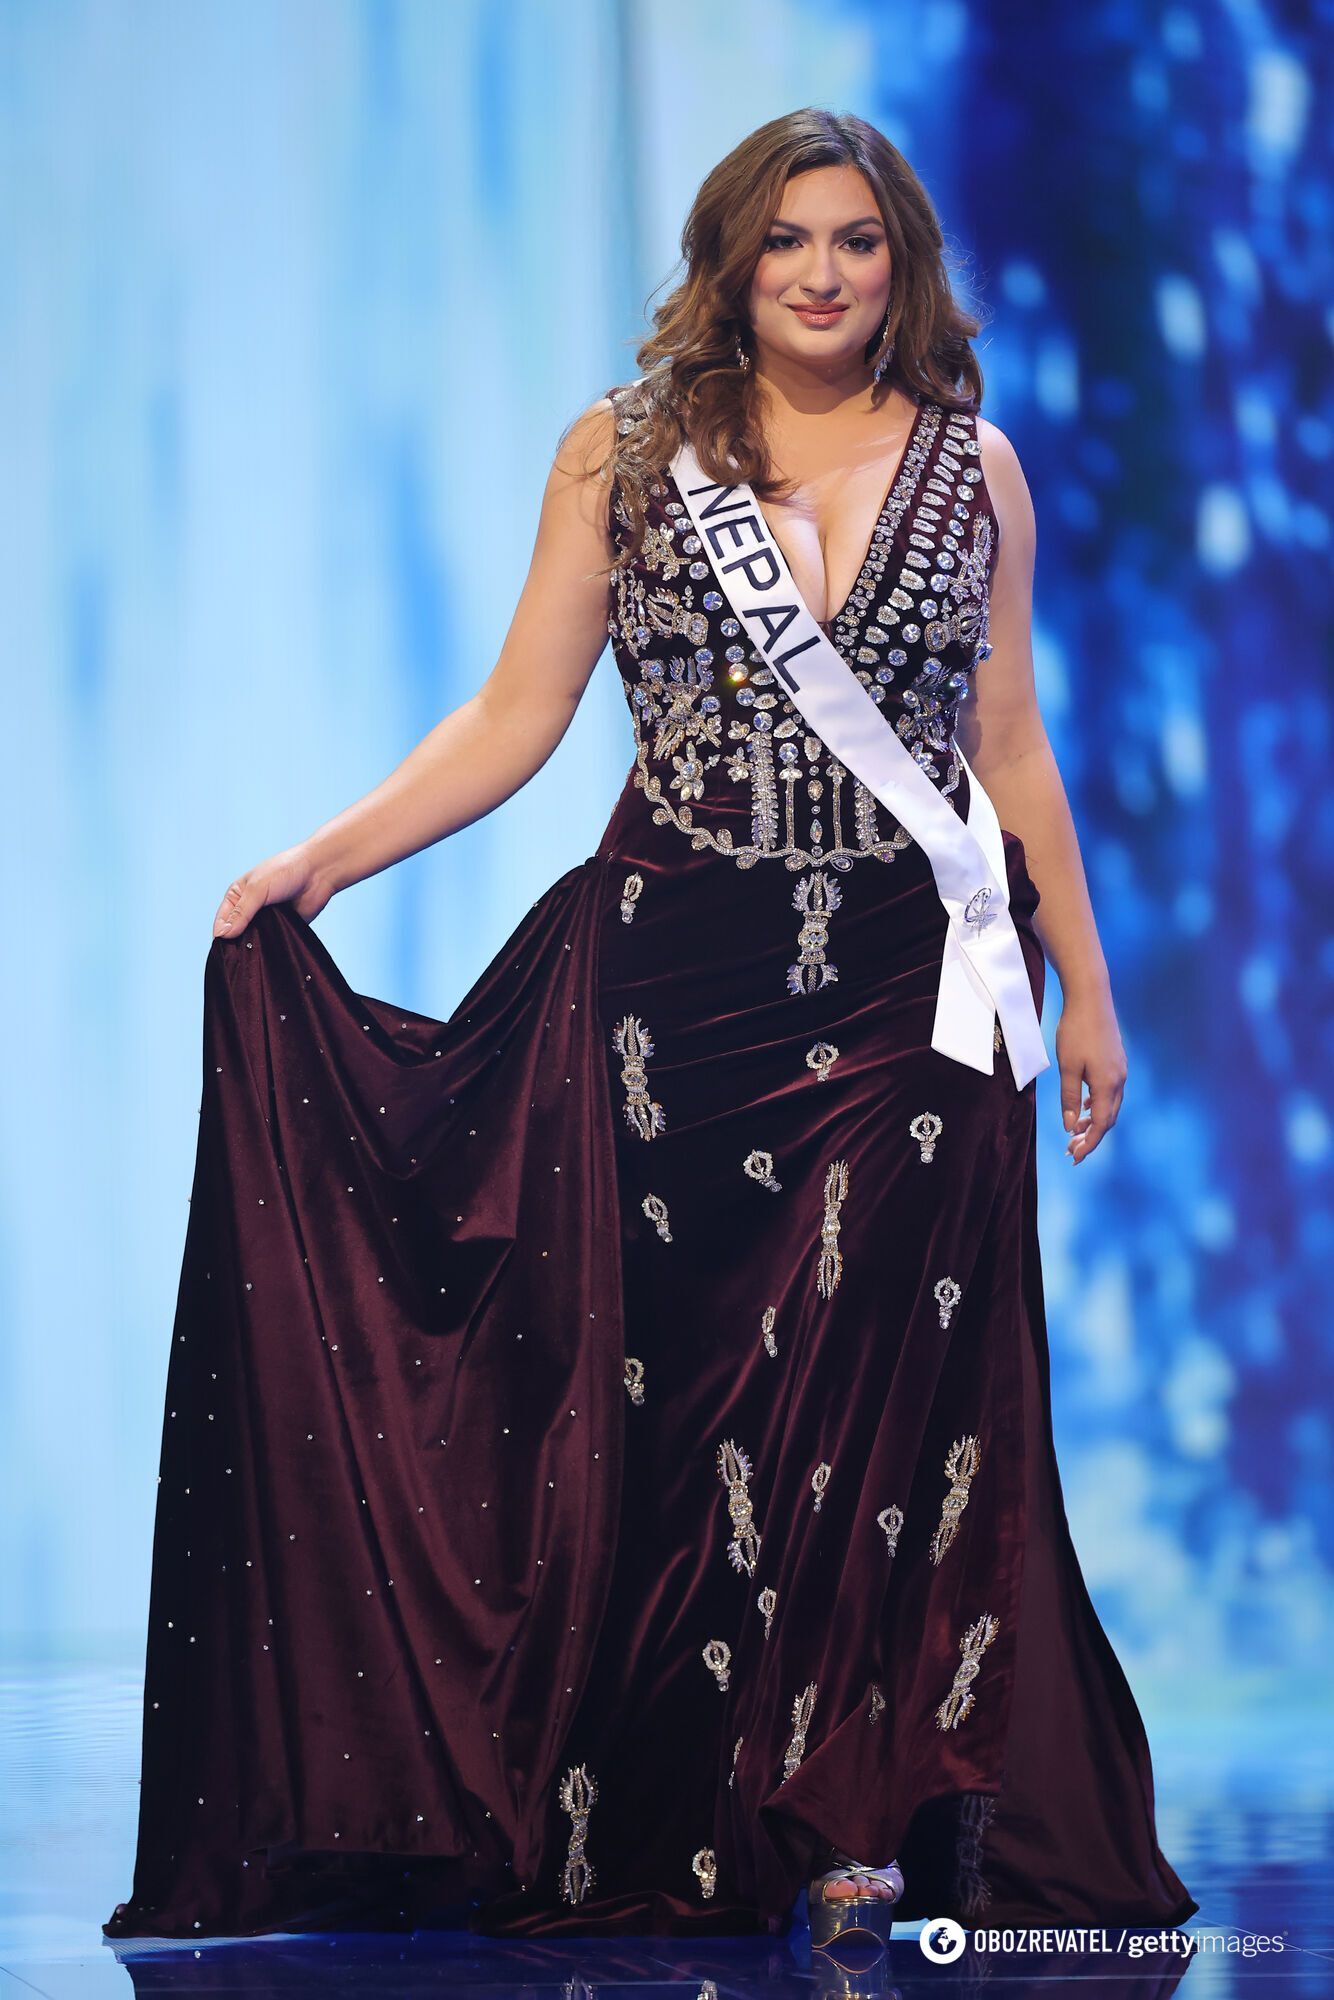 There are no standards: why the audience was impressed by the representative of Nepal at Miss Universe, who entered the top 20. Photo